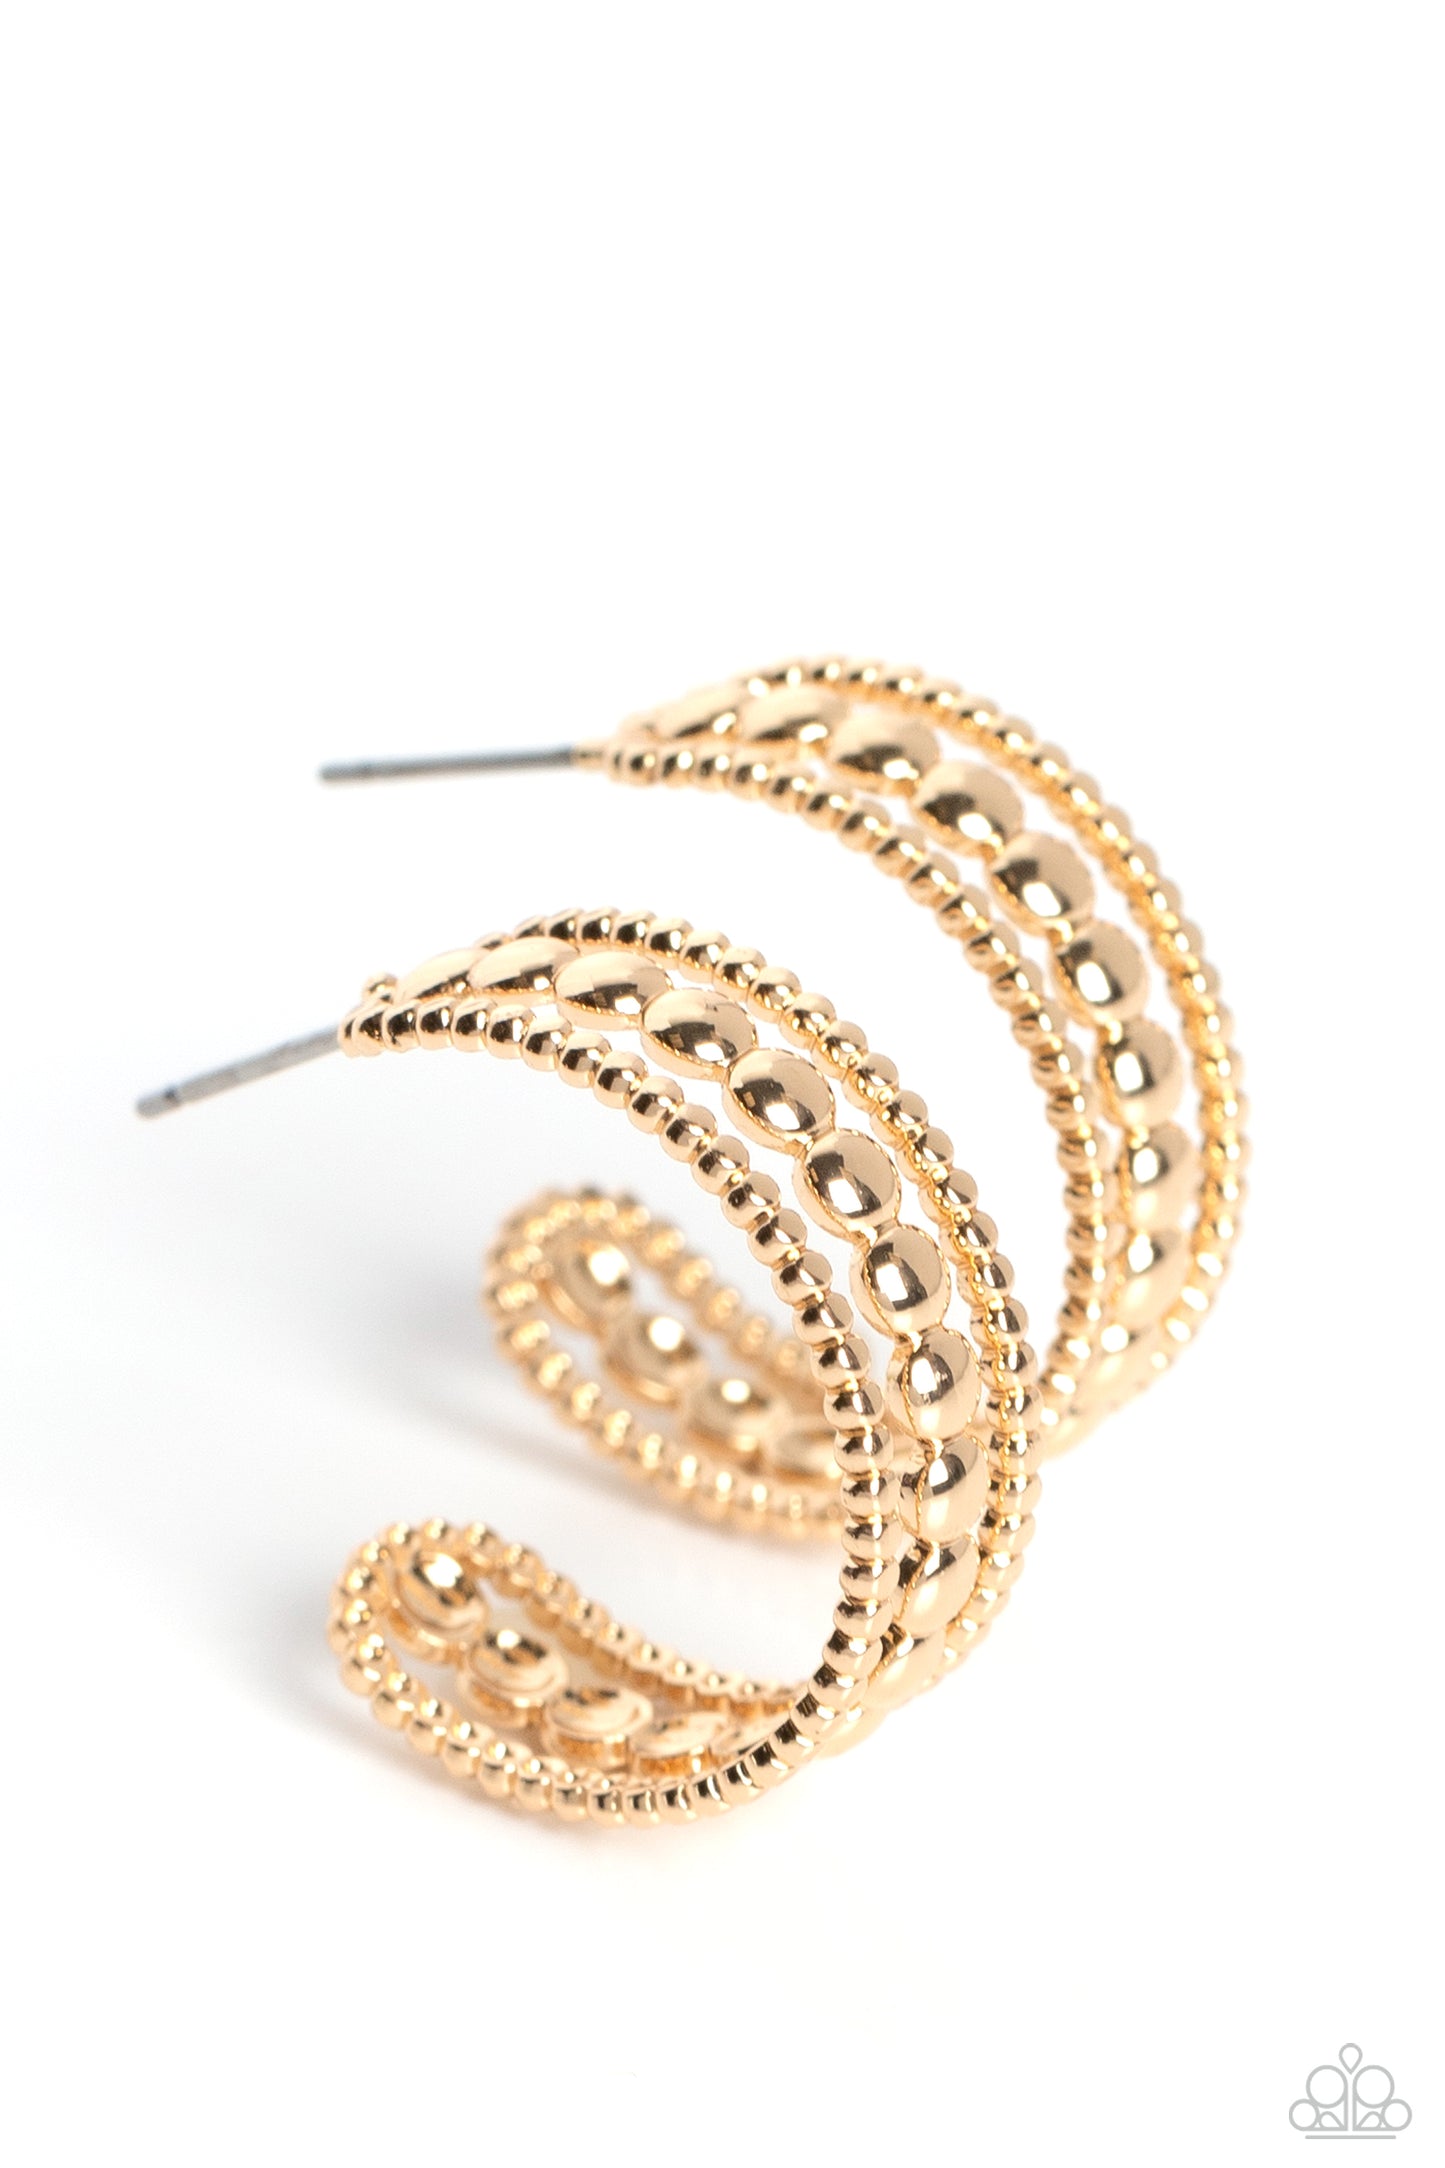 Paparazzi Earrings - Dotted Darling - Gold - Hoops